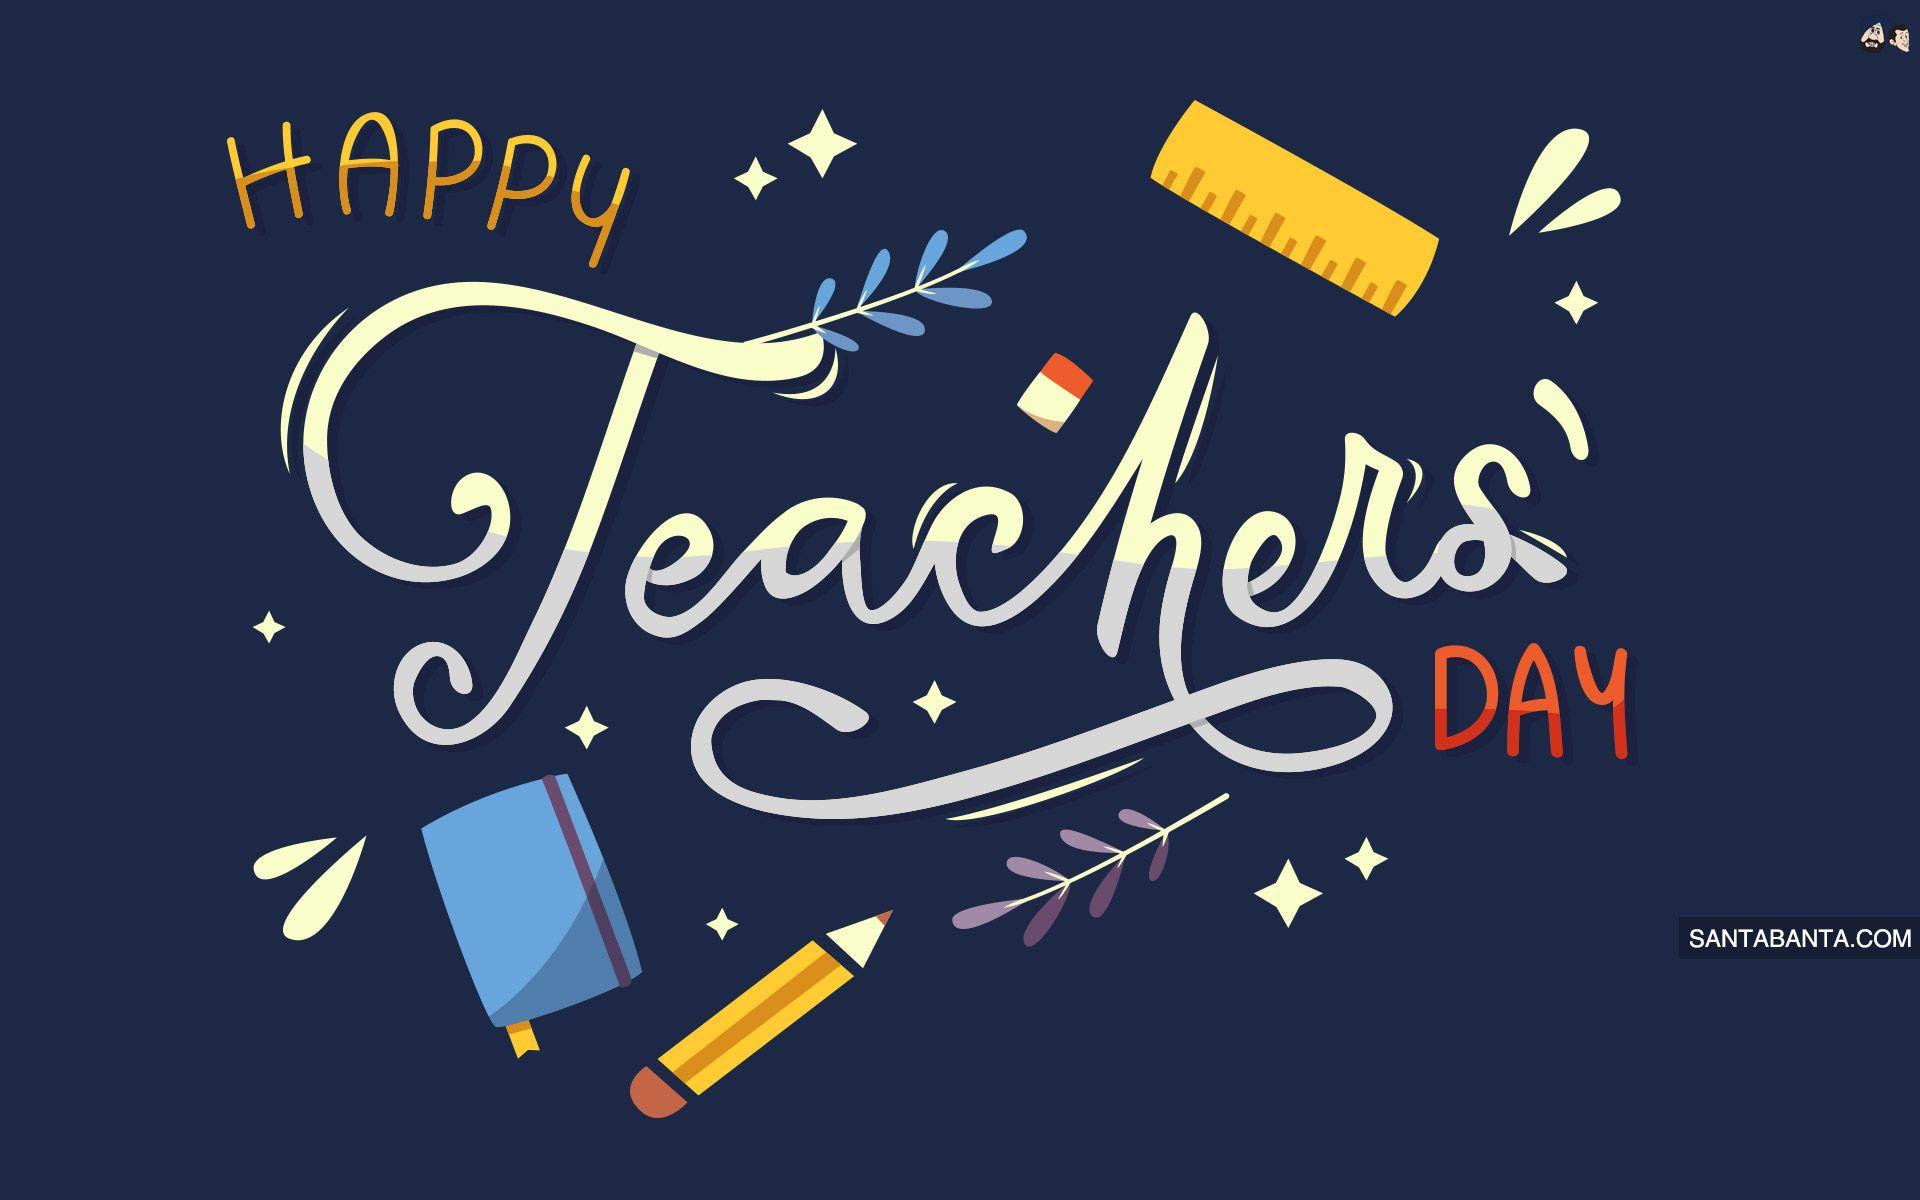 Happy Teachers Day Wallpaper Images | Images and Photos finder